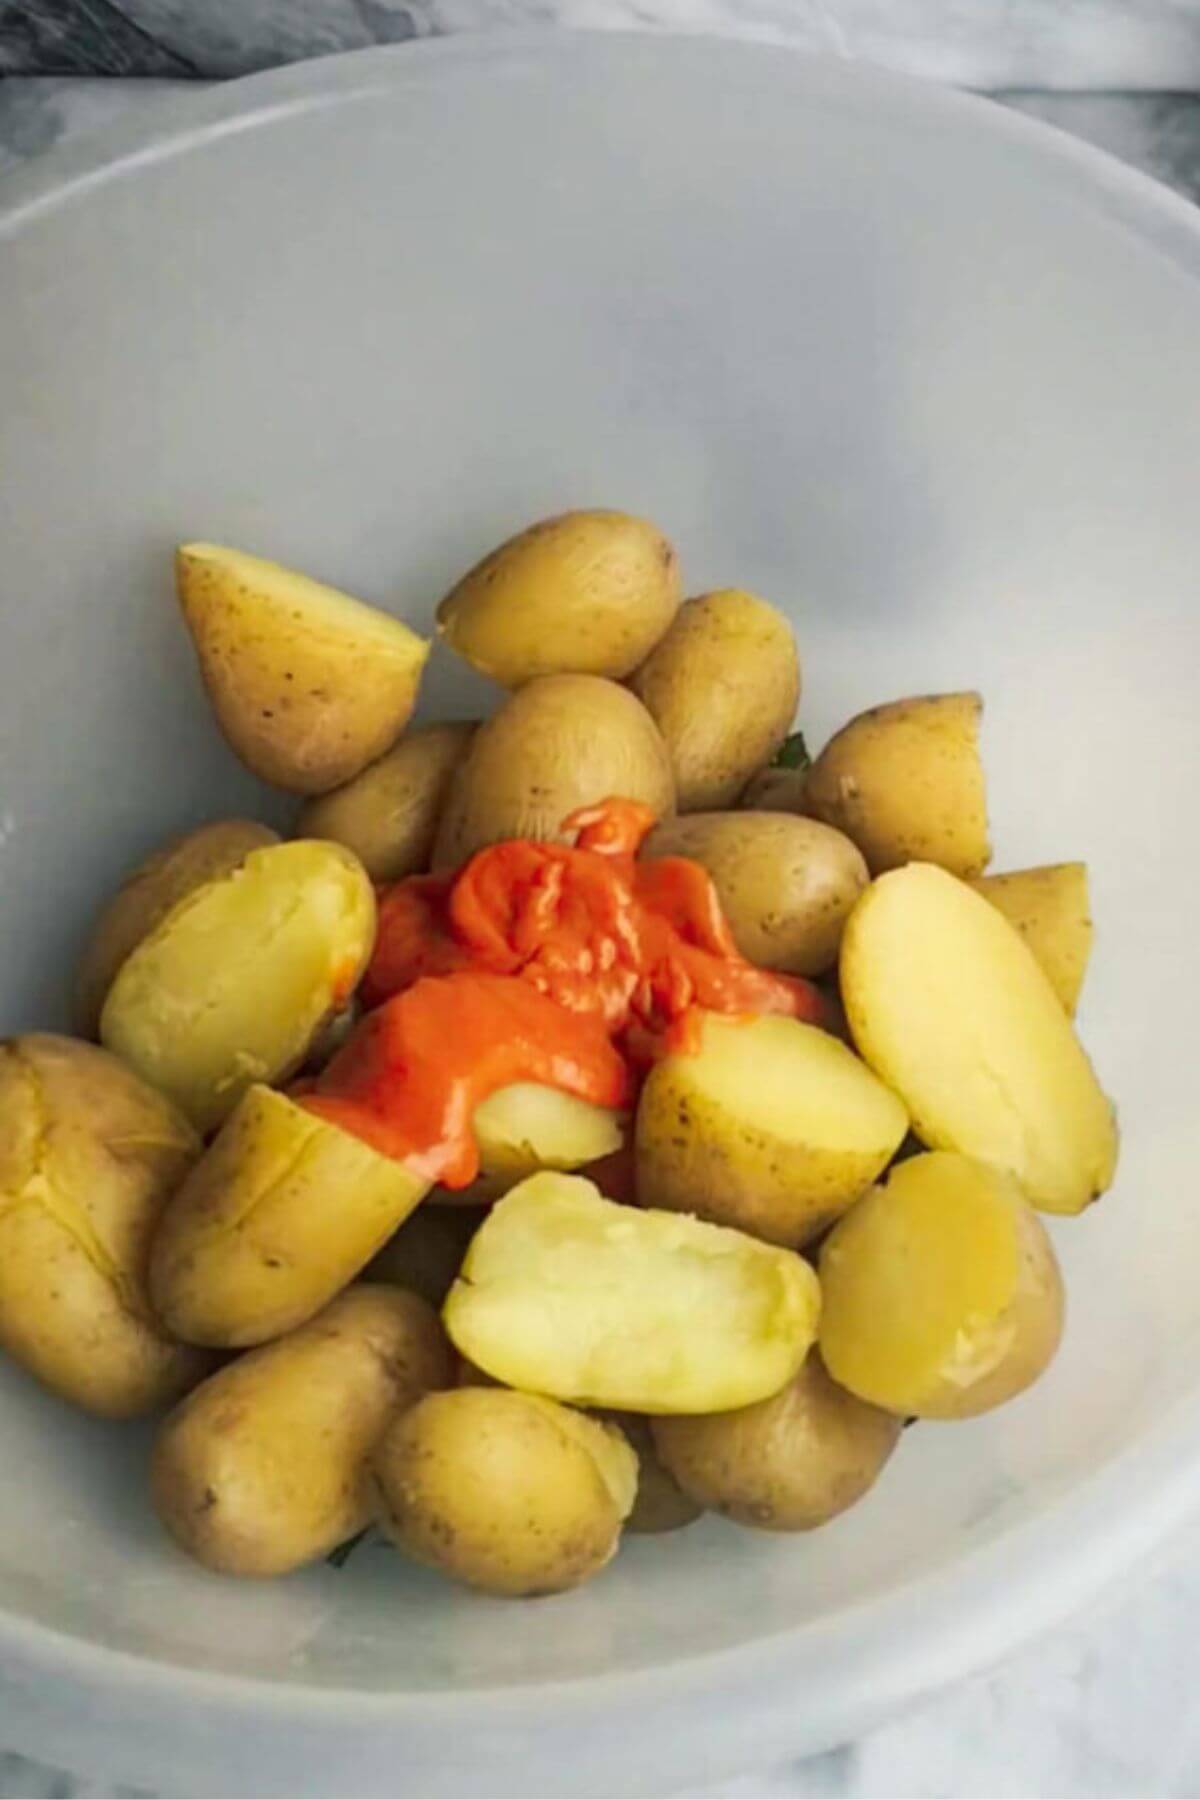 Cooked potatoes and gochujang aioli in a large clear mixing bowl.